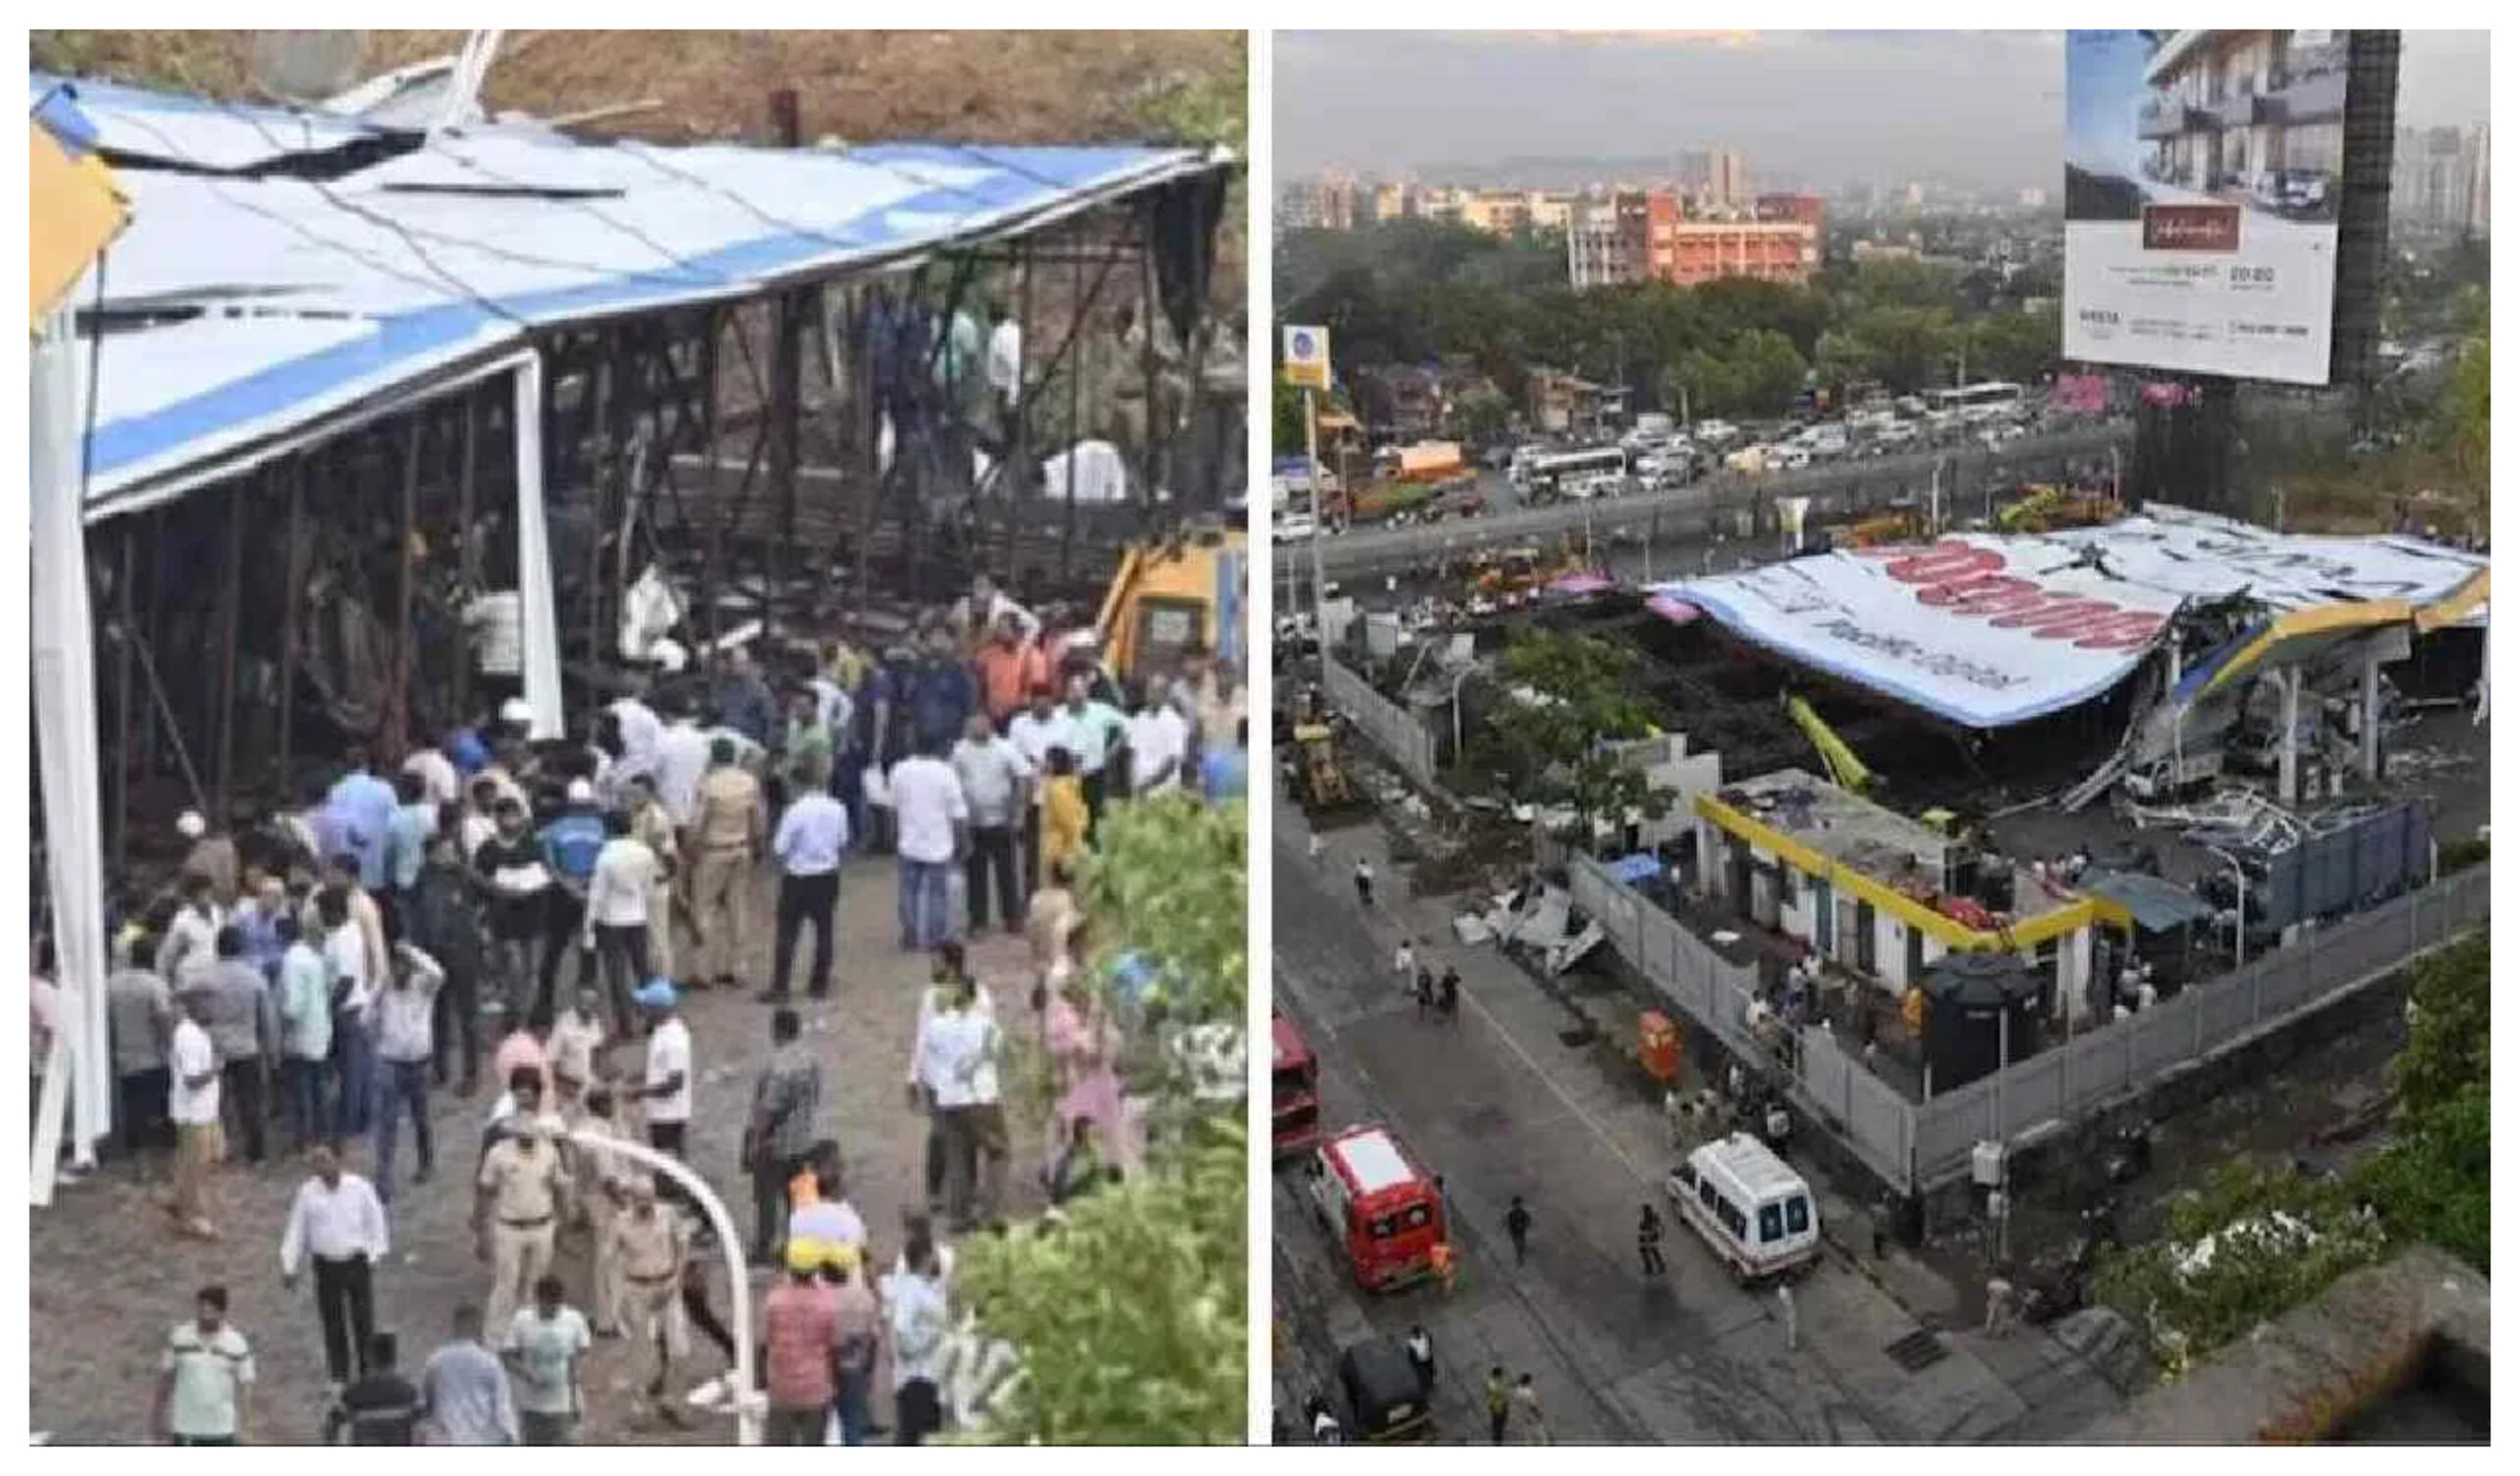 Maharashtra: BMC woke up after the accident, work to remove illegal hoardings started, Mumbai Hoarding Collapse, Mumbai Hording, Mumbai Hording Accident, #mumbai, #hording, #accident, #ghatkopar, #BMC, #police, #investigation, #fire,Ghatkopar hoarding Accident, Ghatkopar Illegal hoarding Accident, BMC, BMC Fir on Police, Mumbai Hording Investigation-youtube-facebook-twitter-amazon-google-totaltv live, total news in hindi